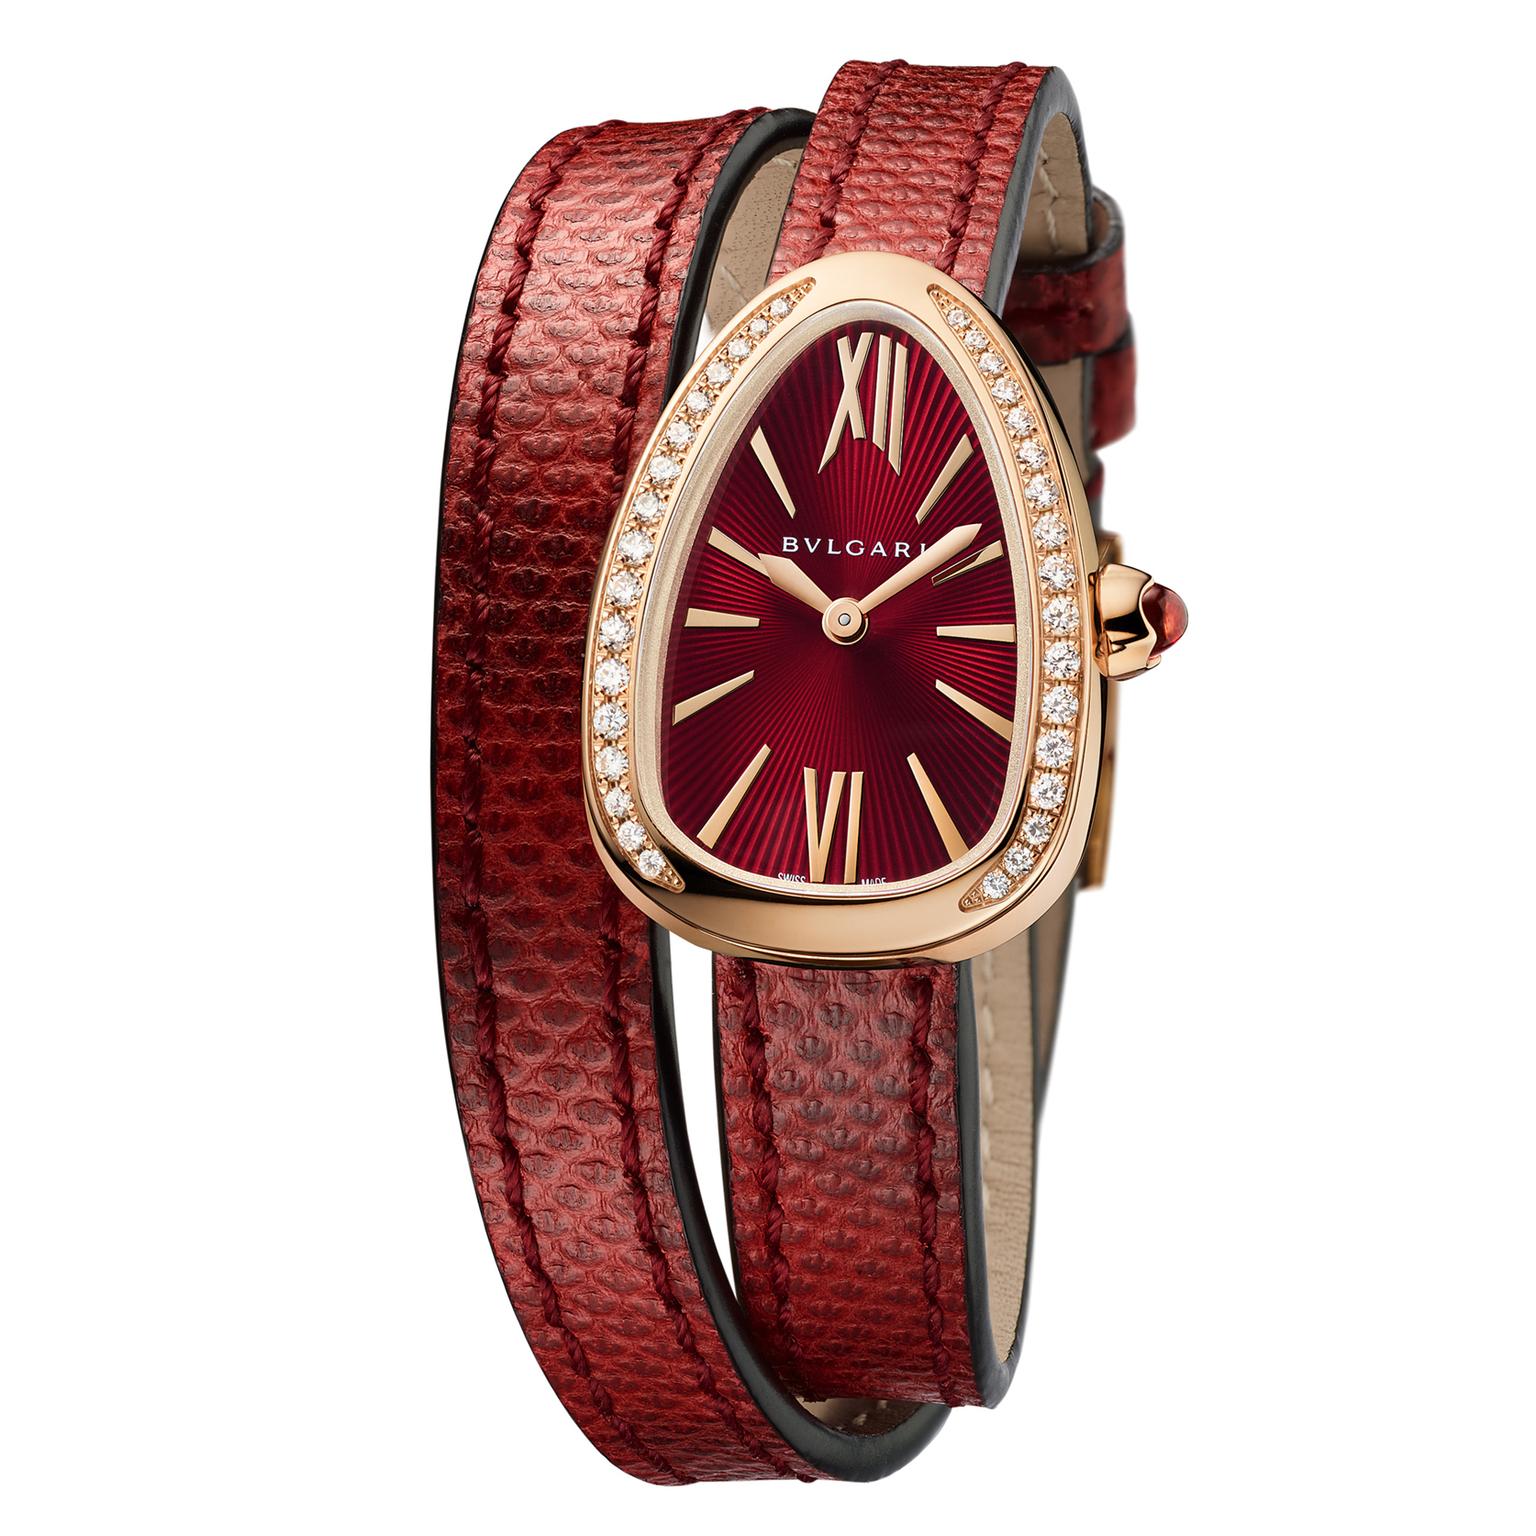 Bulgari Serpenti watch in rose gold with red dial and diamonds